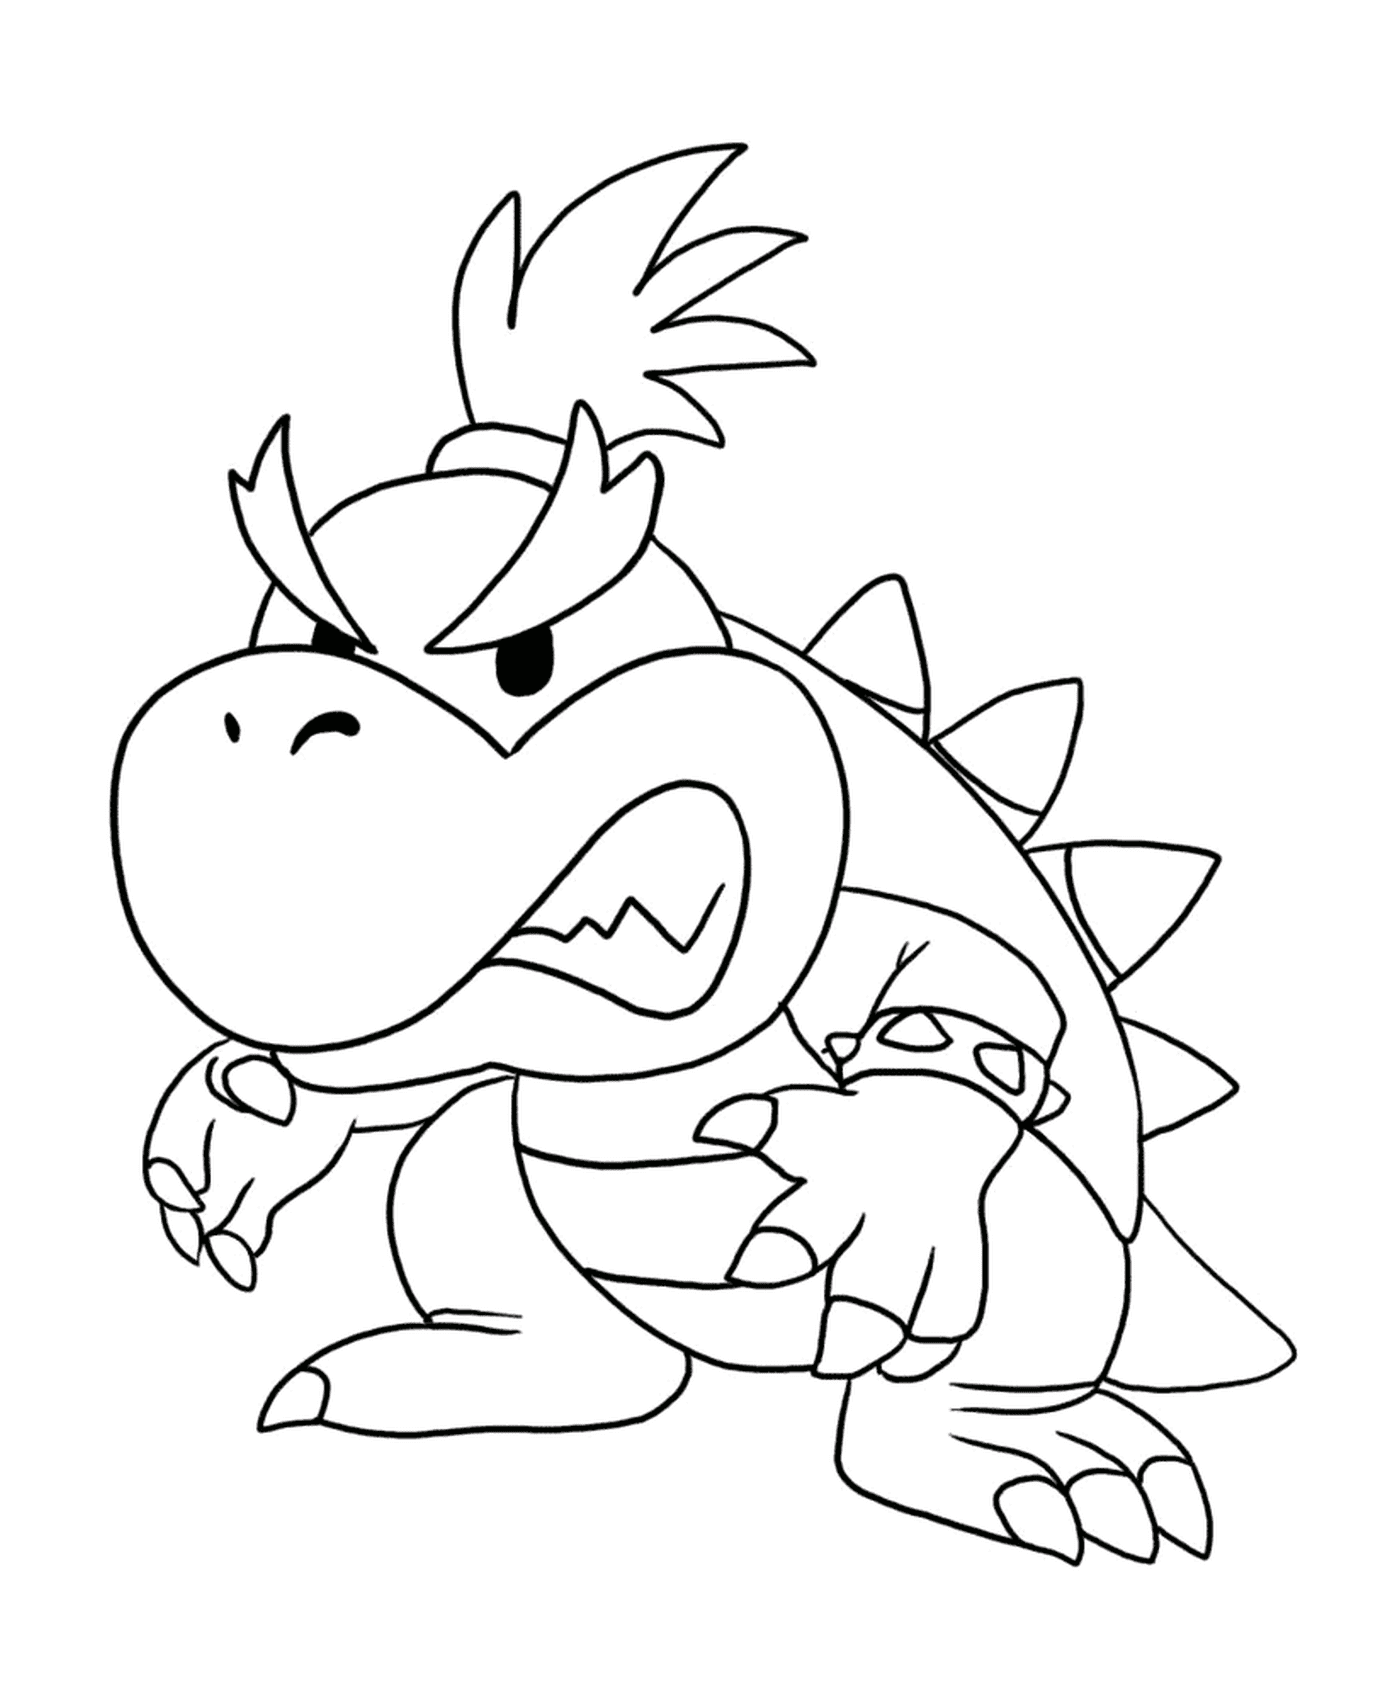  Bowser Jr. when he was a kid 